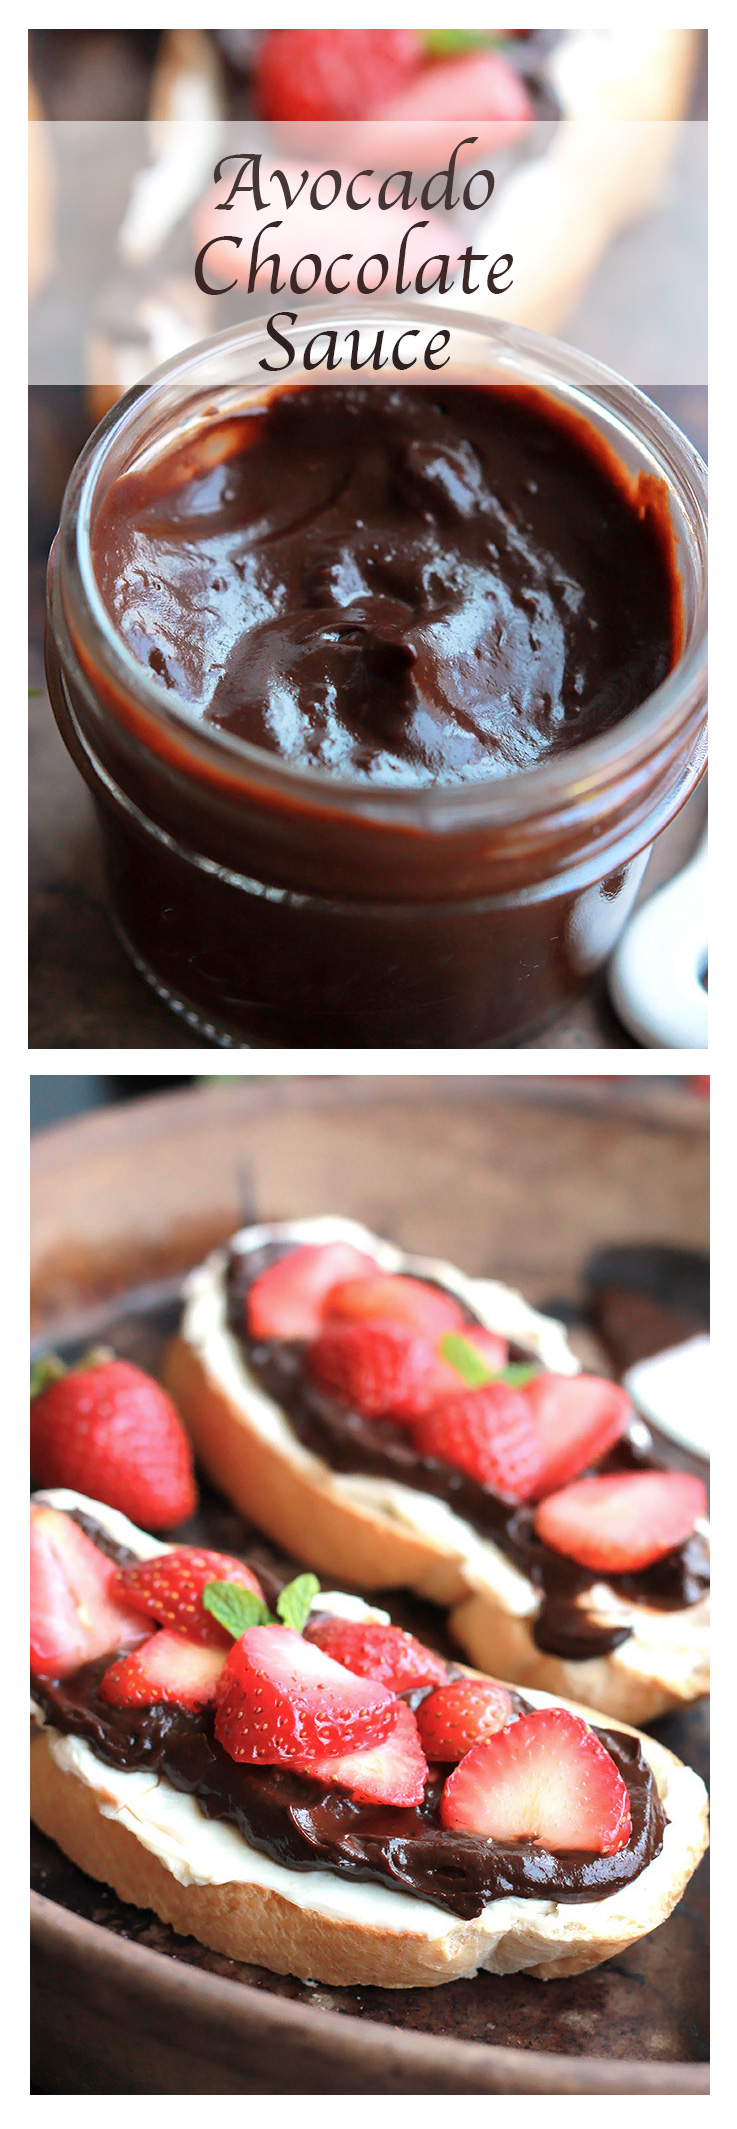 Avocado and Chocolate - Make your own smooth, creamy and decadent chocolate spread in just minutes. If you don't tell, no one will ever know that it's a mix of avocado and cocoa powder. It's simply delicious, Avocado Chocolate Sauce.